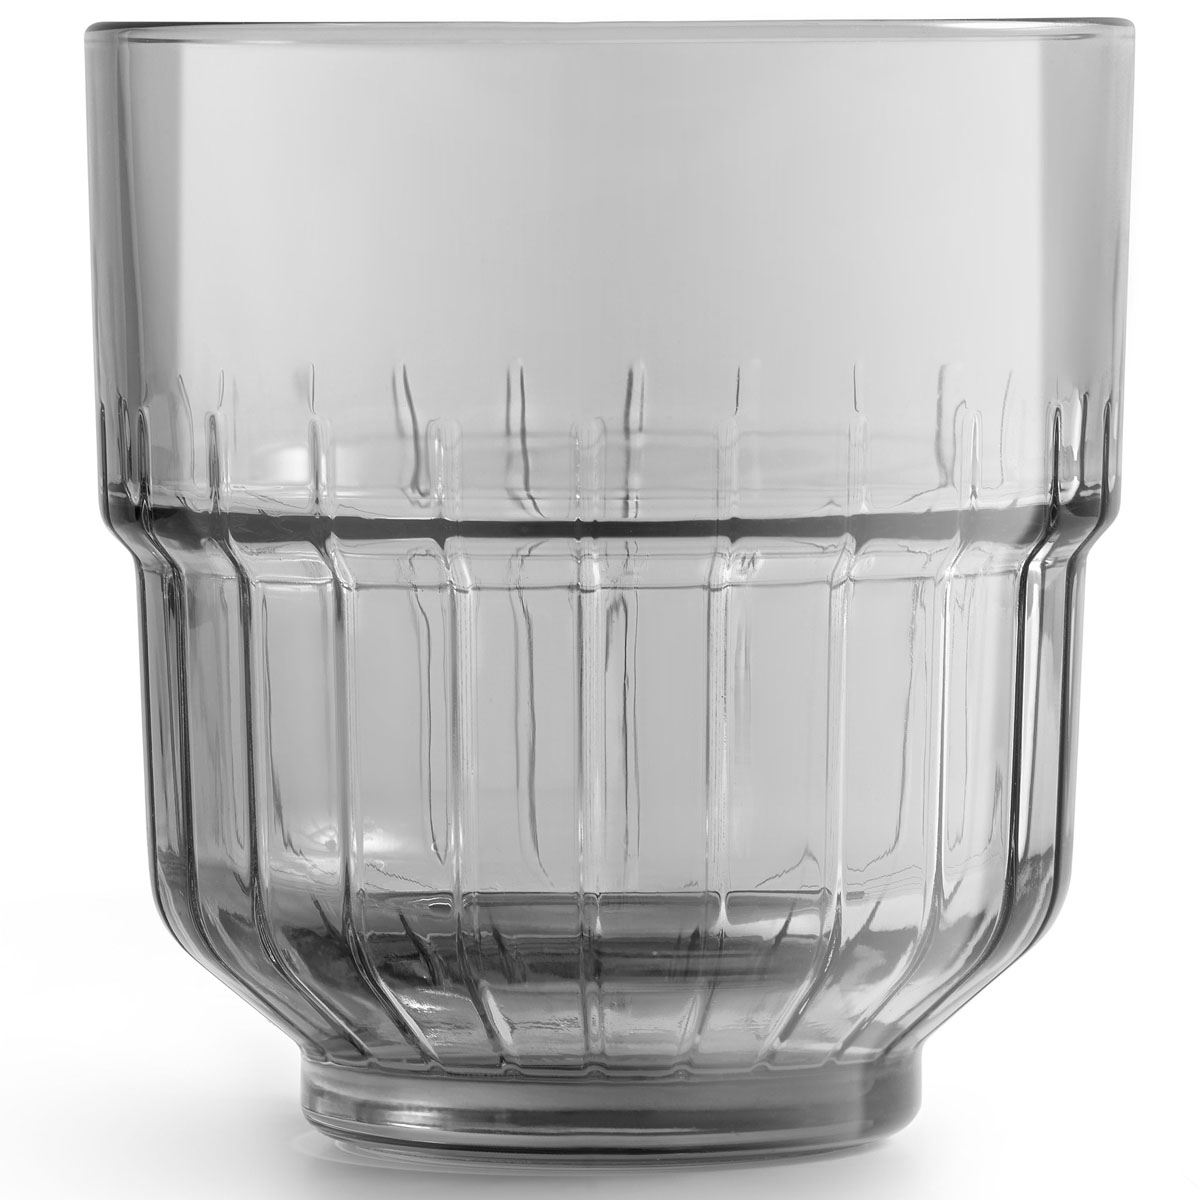 COPOS LIBBEY WHISKY LINQ 26.6CL